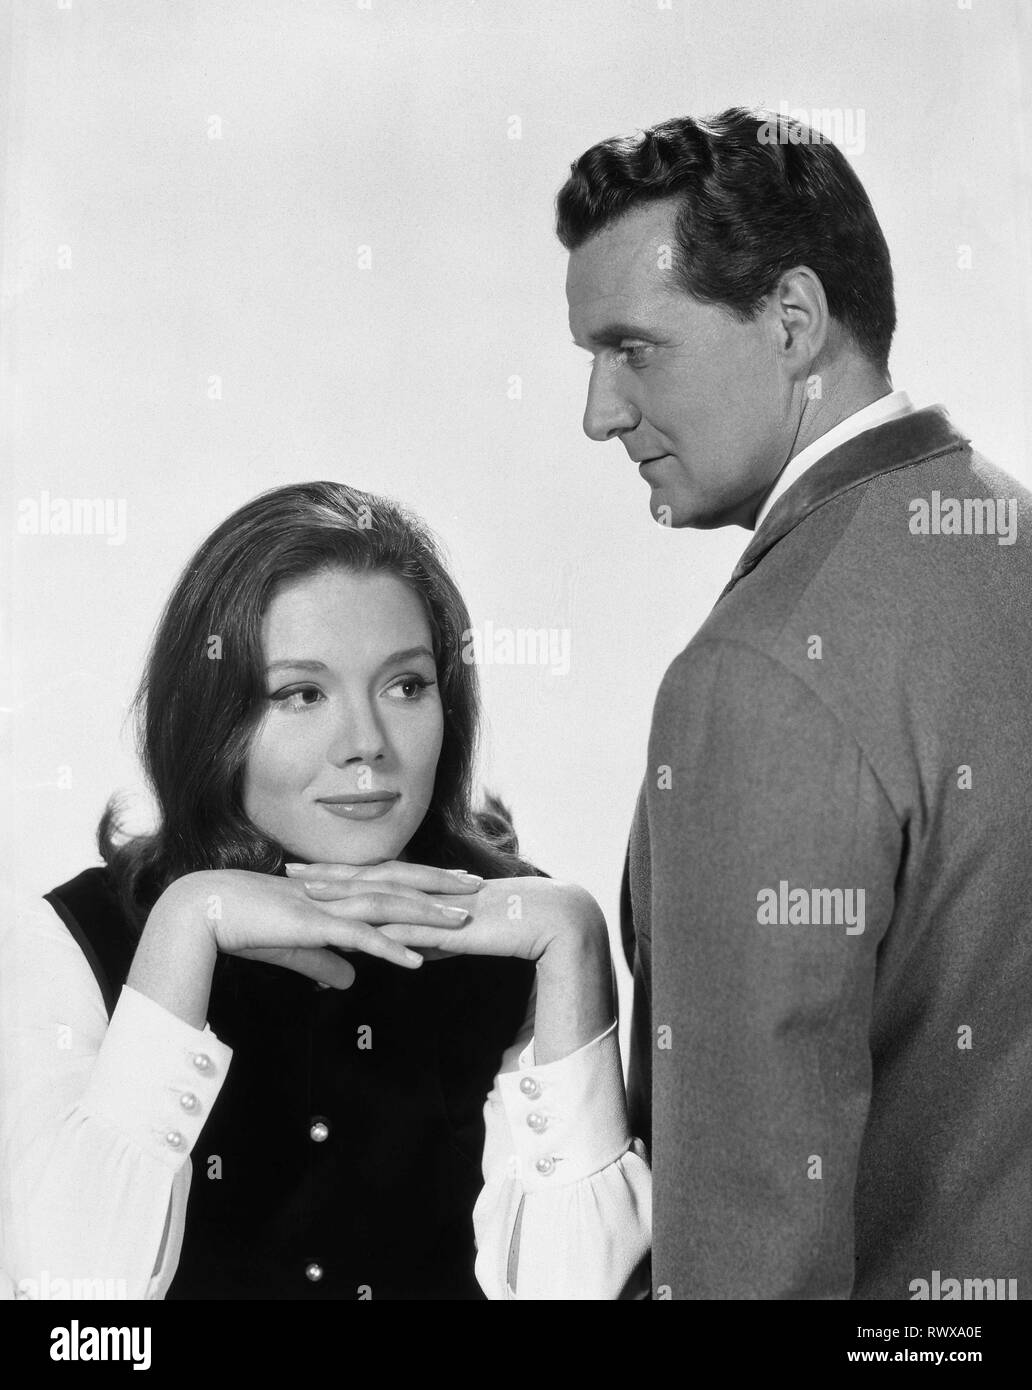 Patrick Macnee as John Steed Diana Rigg as Emma Peel  THE AVENGERS 1965 ABC Weekend Television / Associated British Corporation Stock Photo